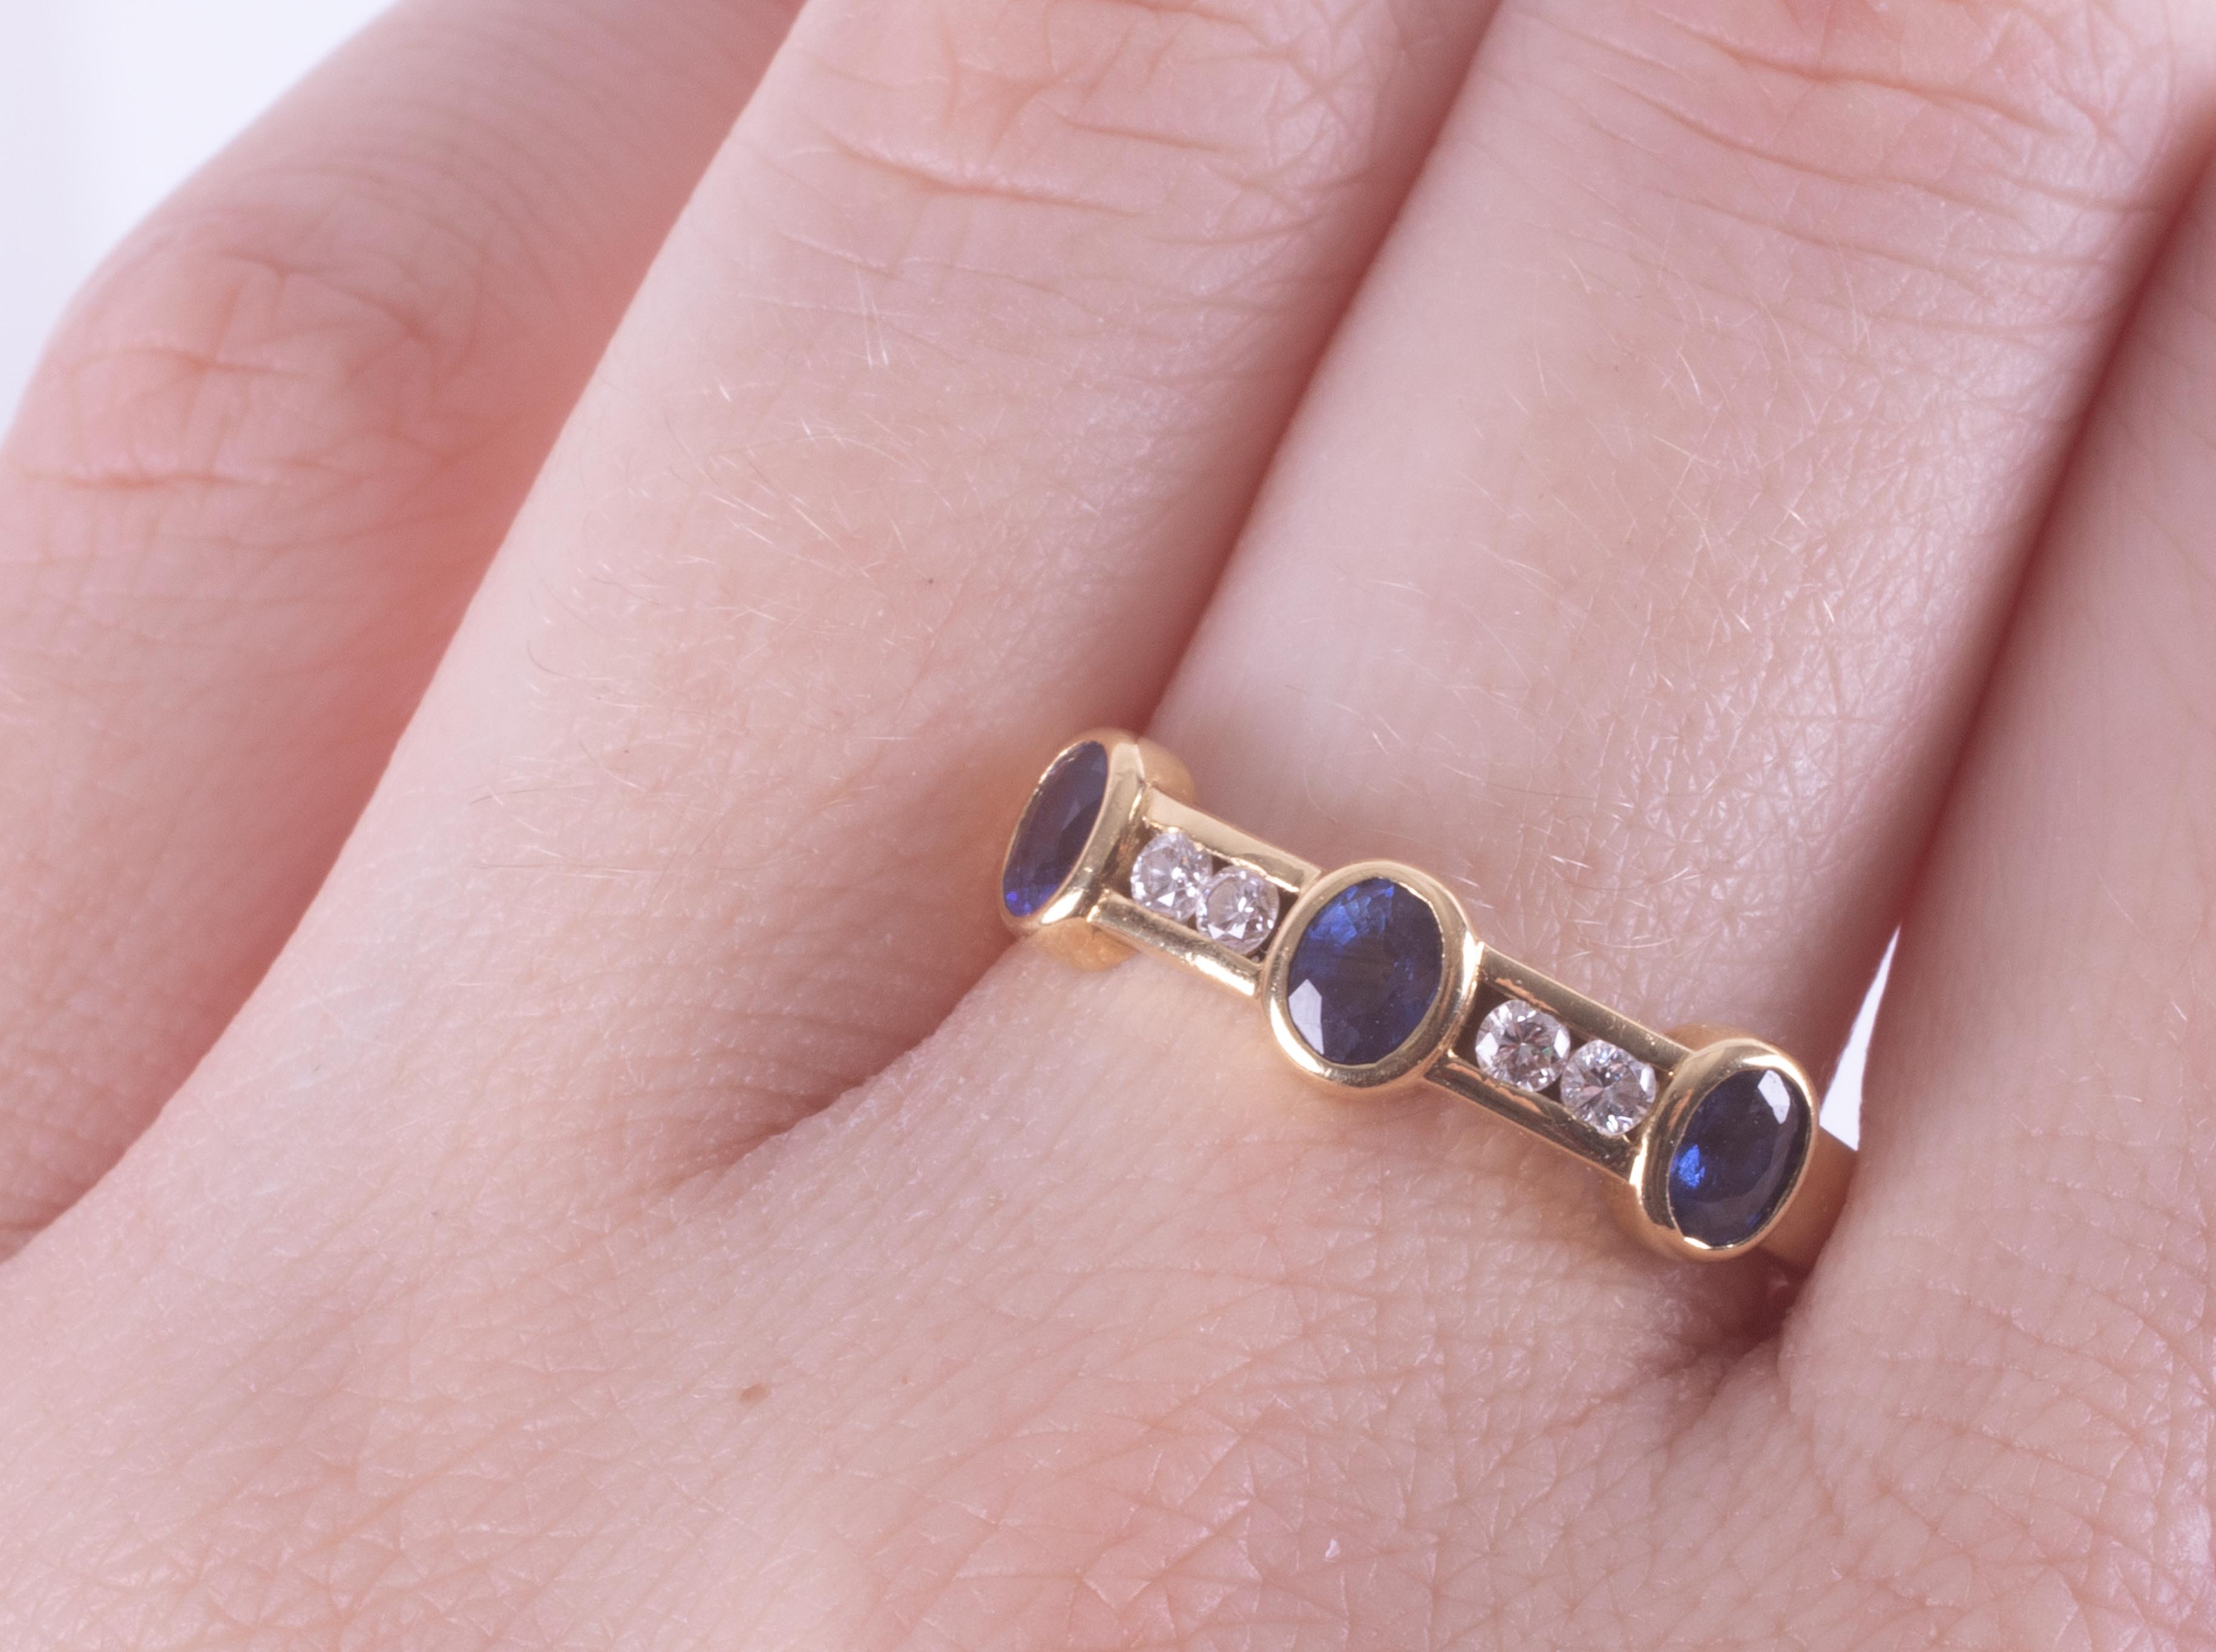 An 18ct yellow gold band set with three oval cut sapphires, total weight approx. 0.63 carats with - Image 2 of 2